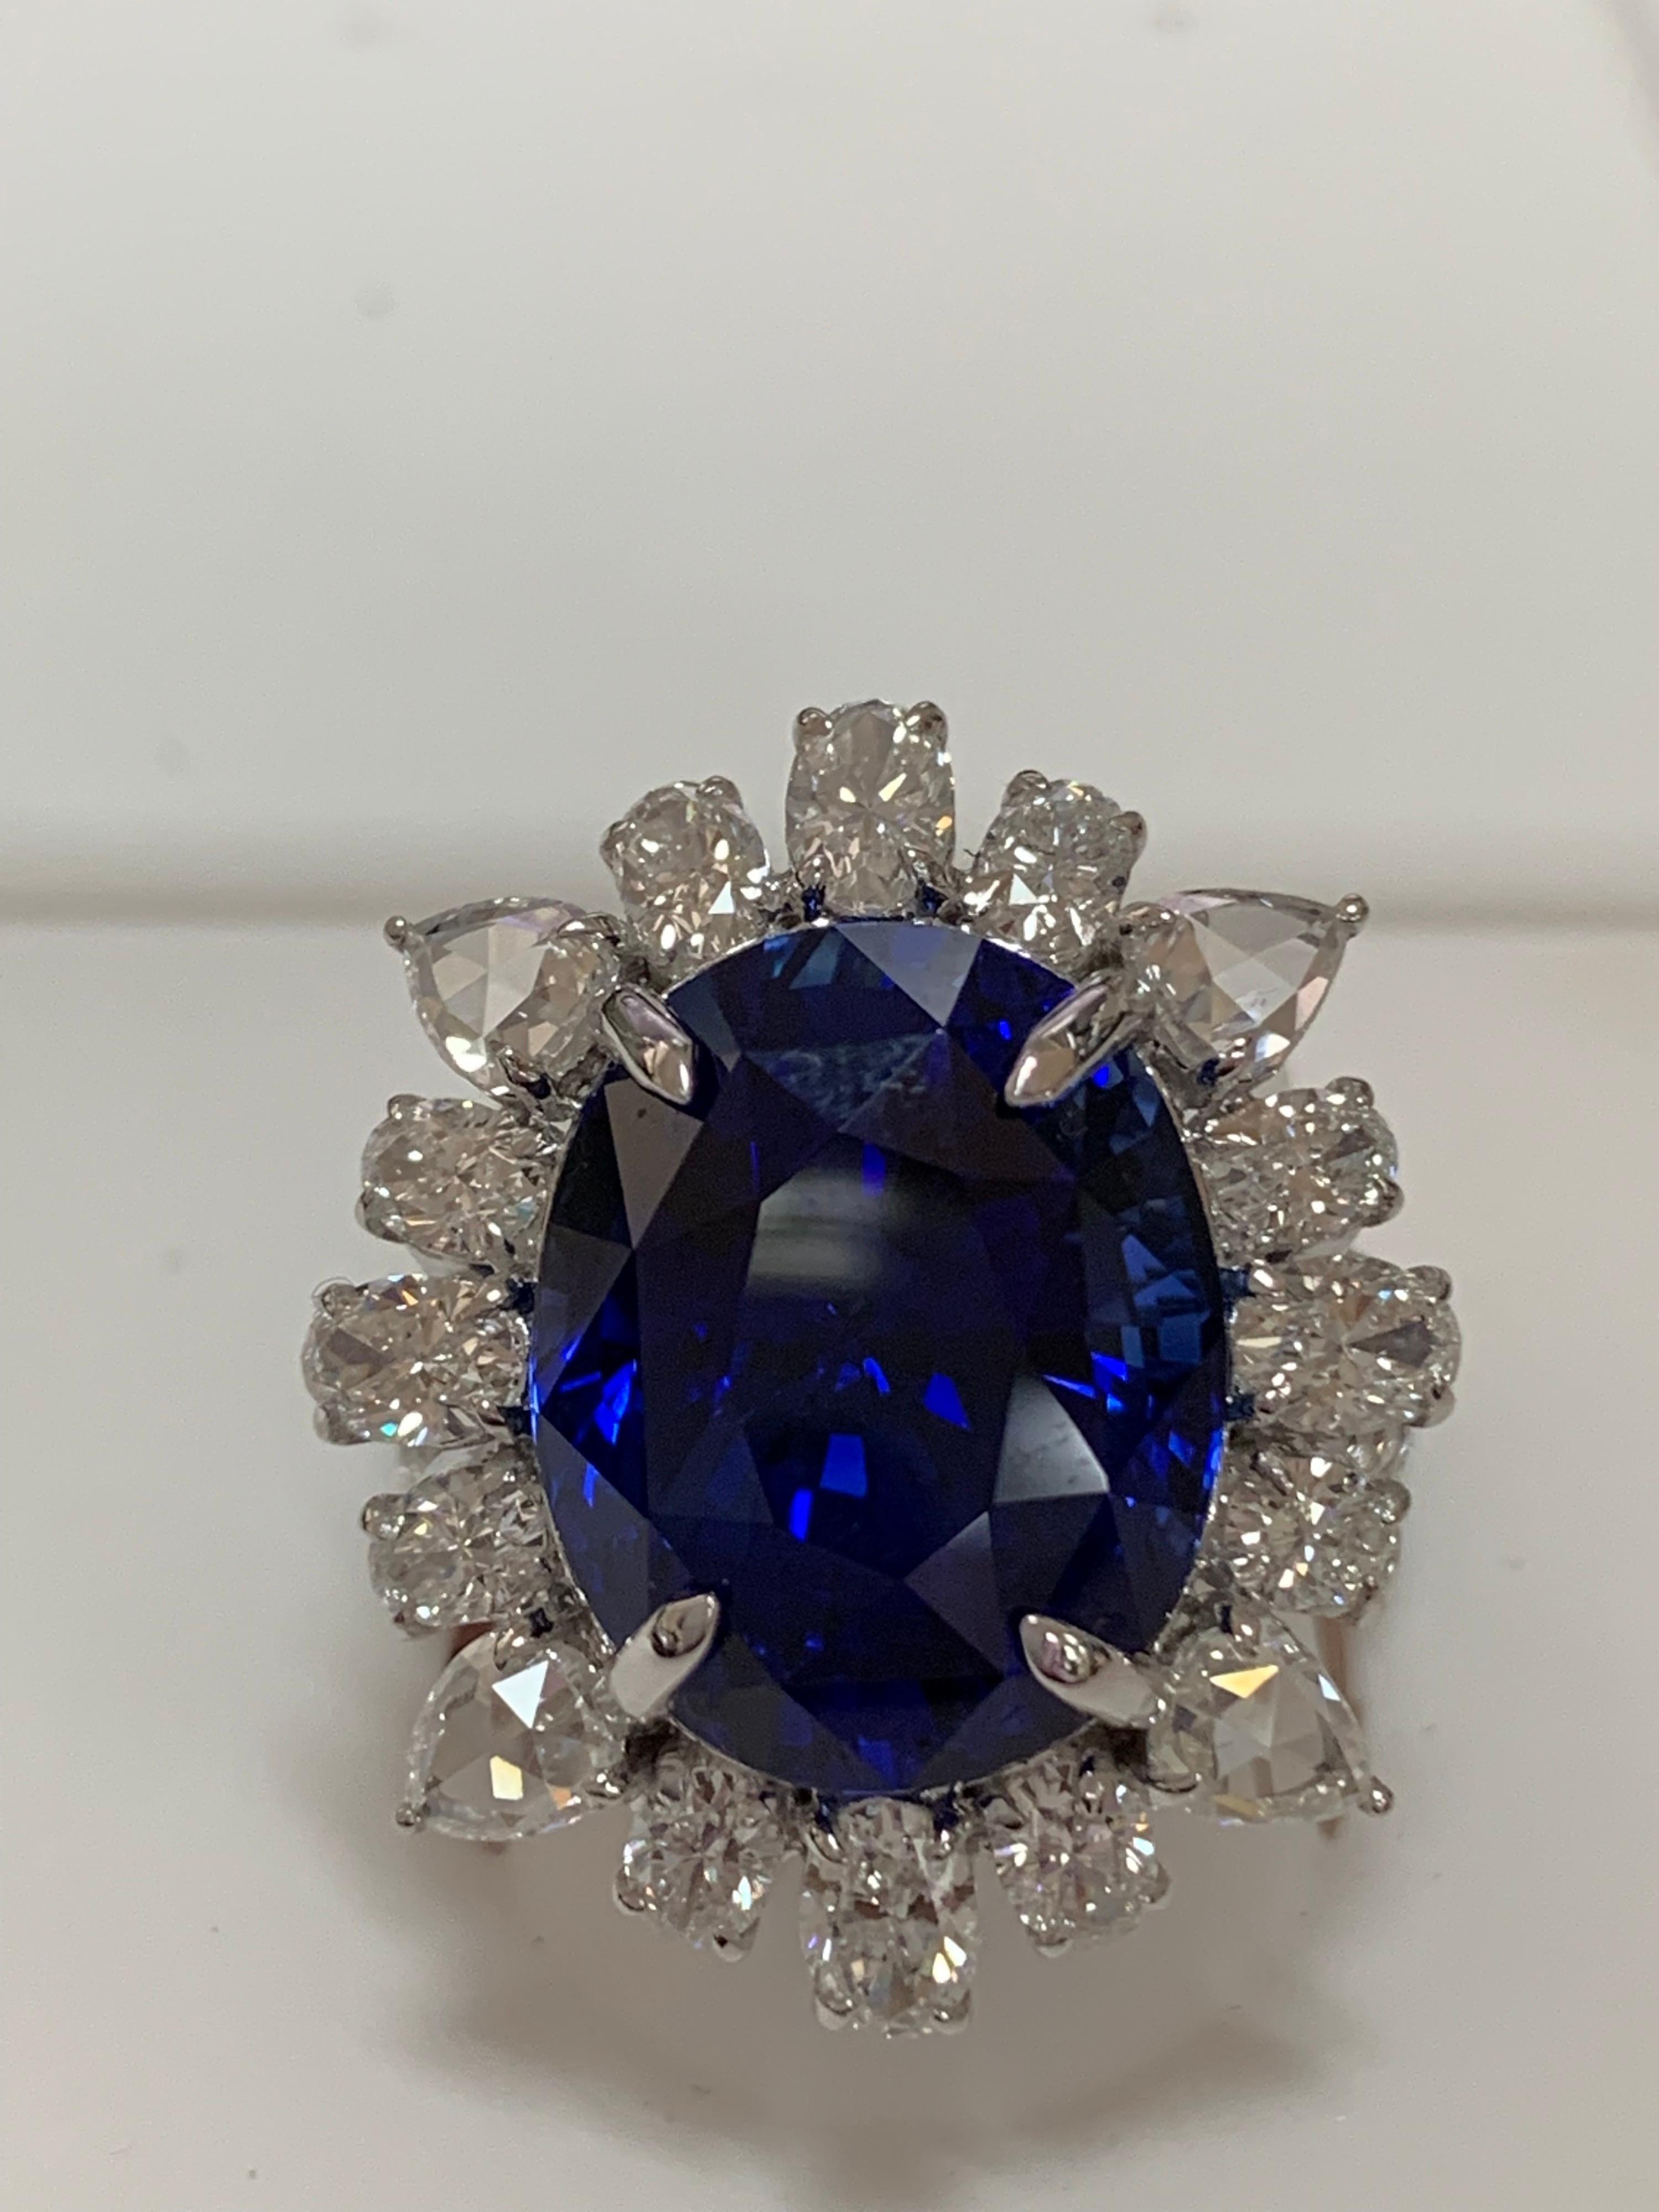 Contemporary GIA Certified 20.08 Carat Blue Sapphire and Diamonds Ring